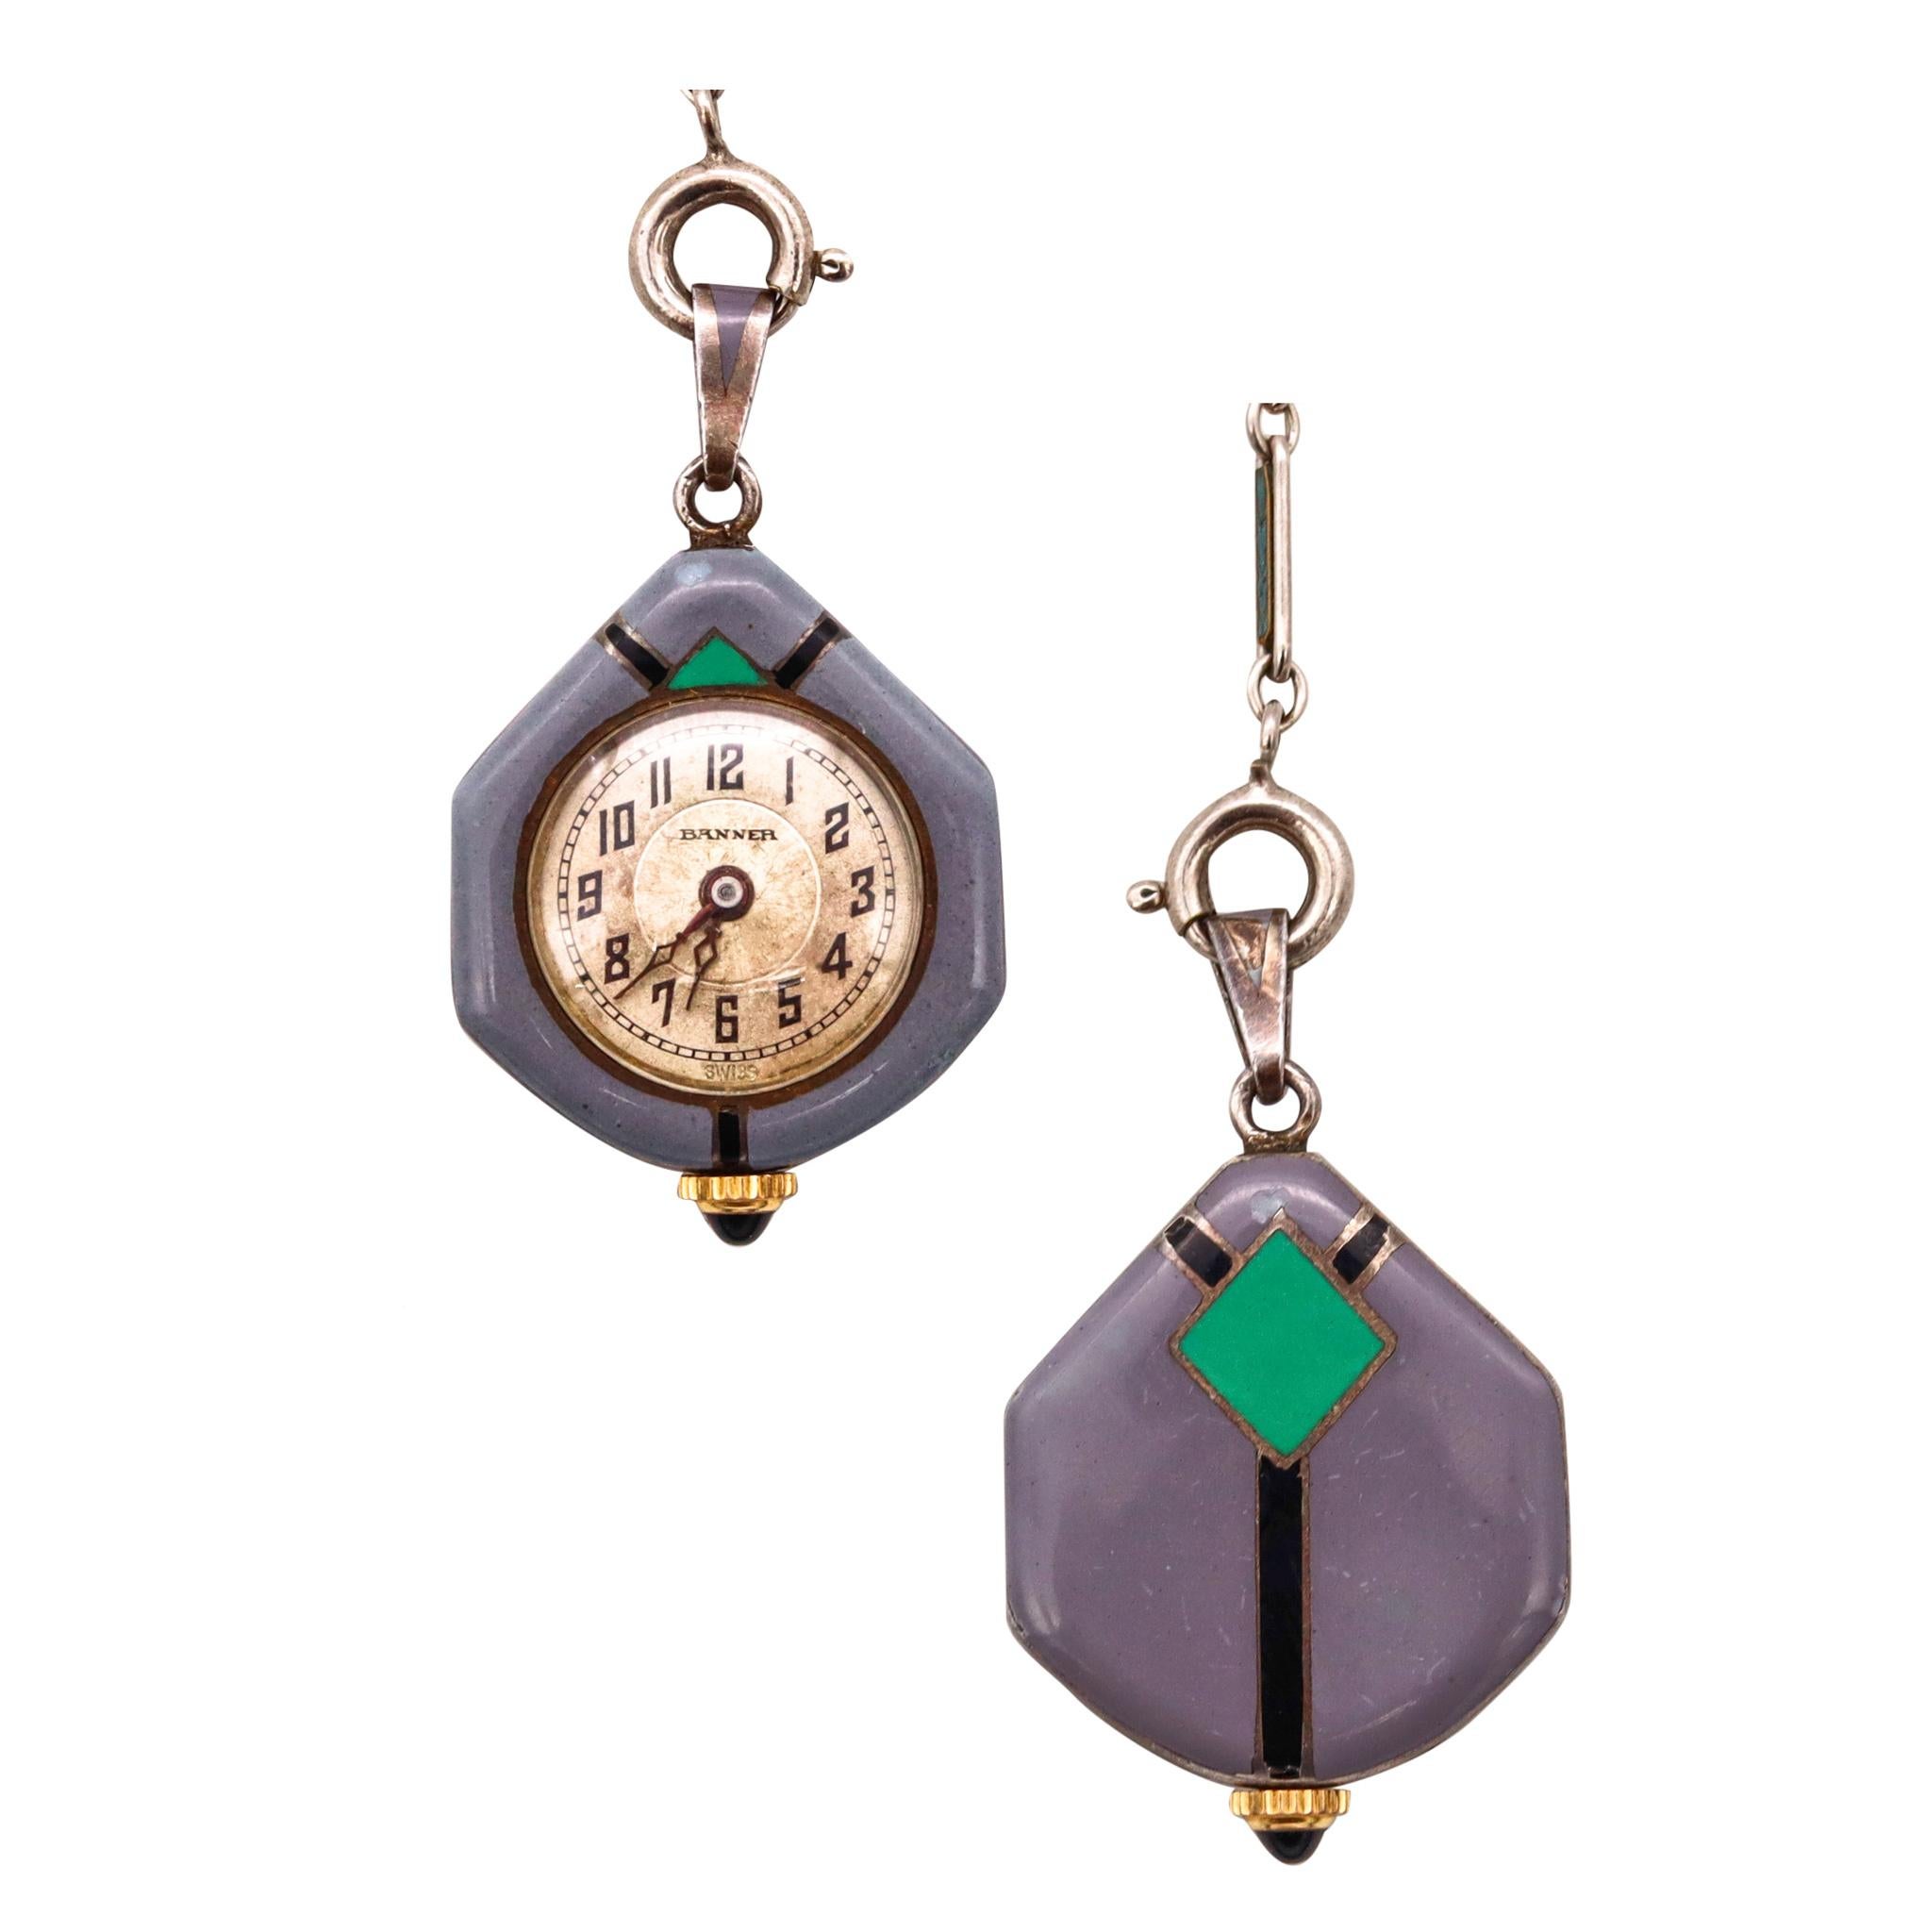 Art deco chatelaine watch designed by Banner.

An antique hexagonal piece, created in Germany during the Art Deco period, circa 1930. This very unique chatelaine watch, was crafted in sterling silver and decorated, with geometric patterns made up